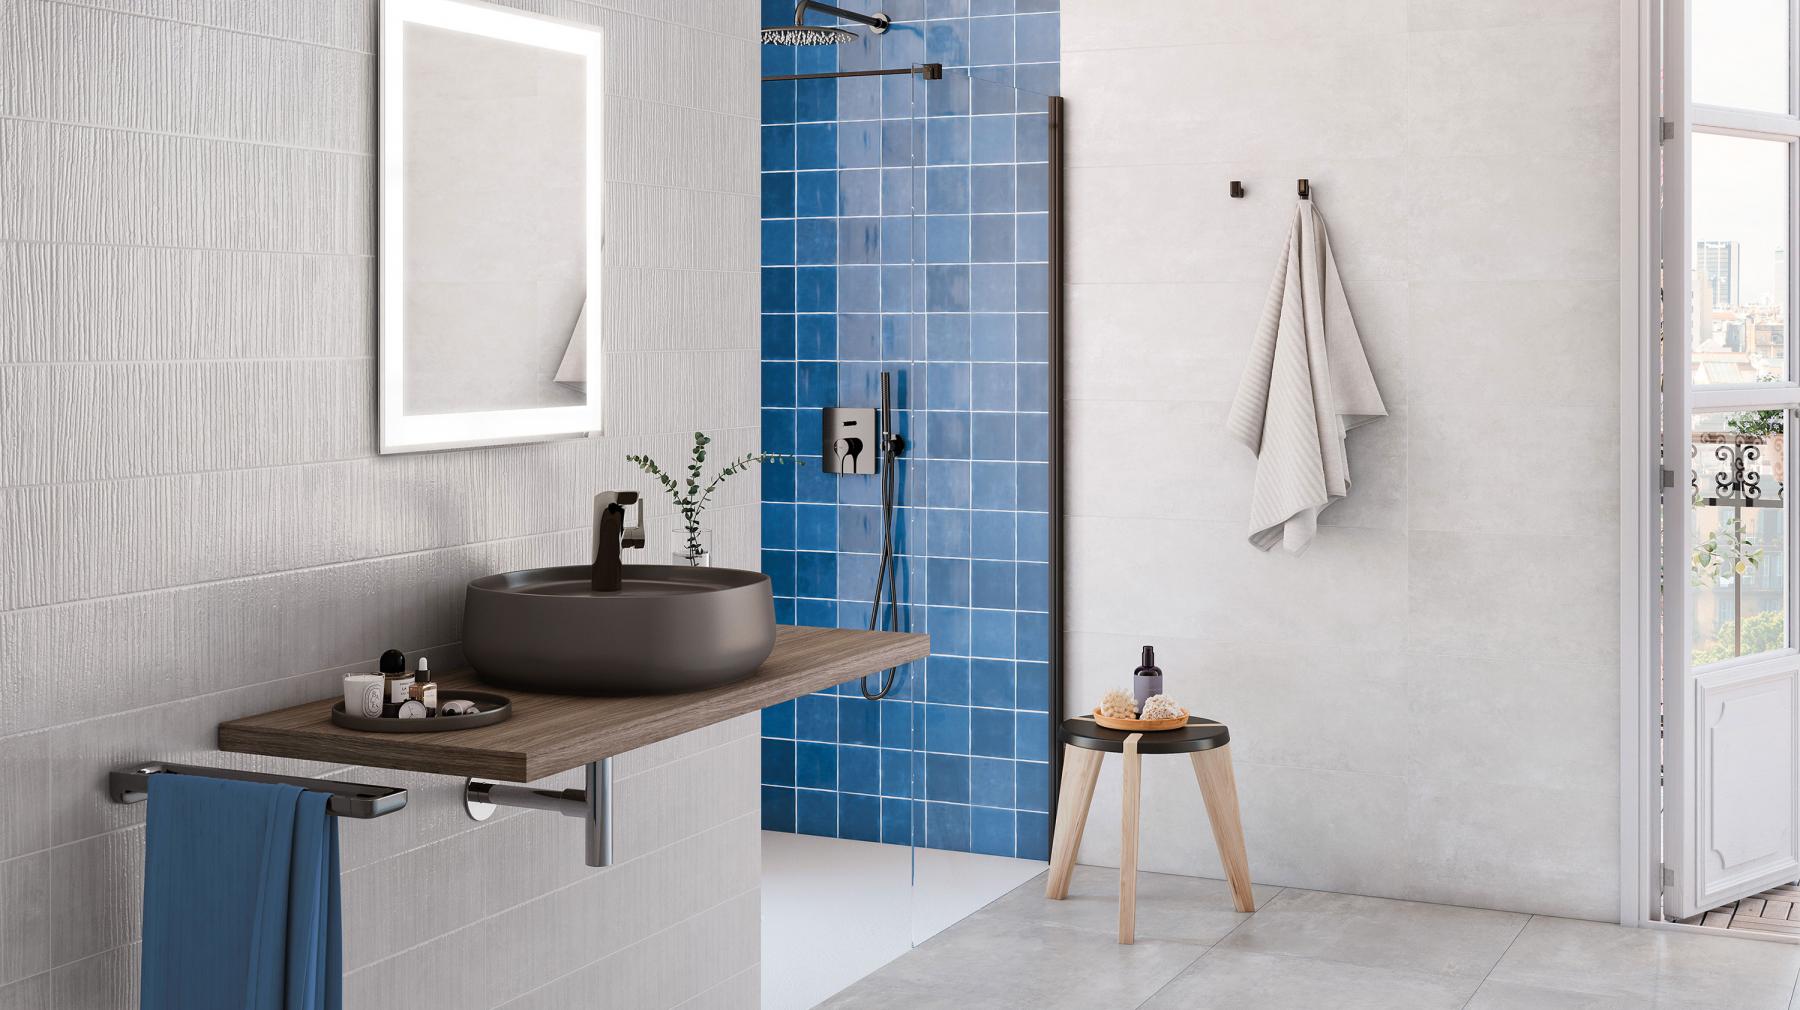 Accessories for a bathroom in full color │ Roca Life